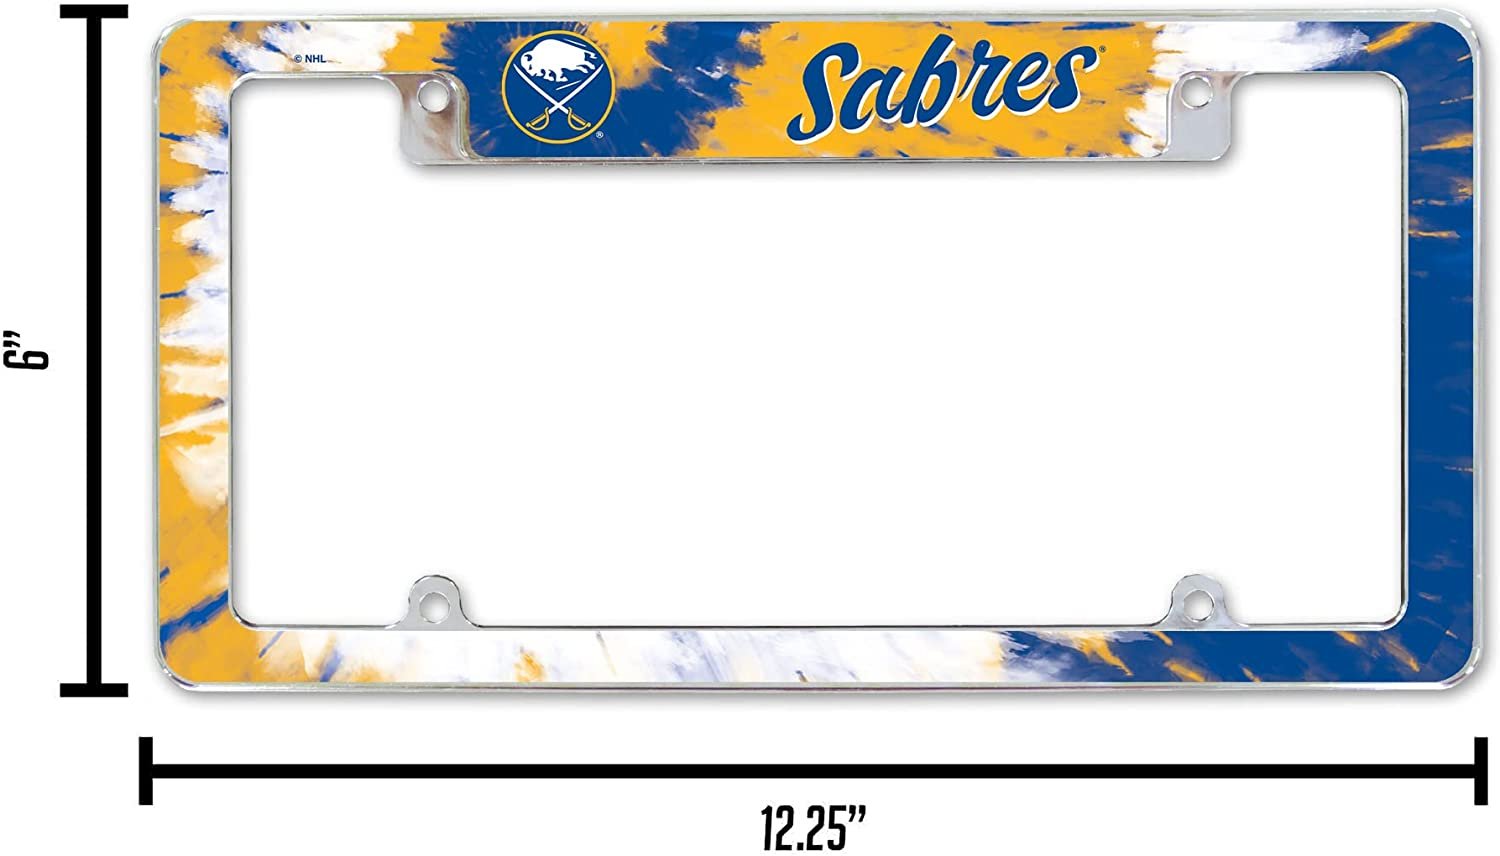 Buffalo Sabres Metal License Plate Frame Chrome Tag Cover Tie Dye Design 6x12 Inch